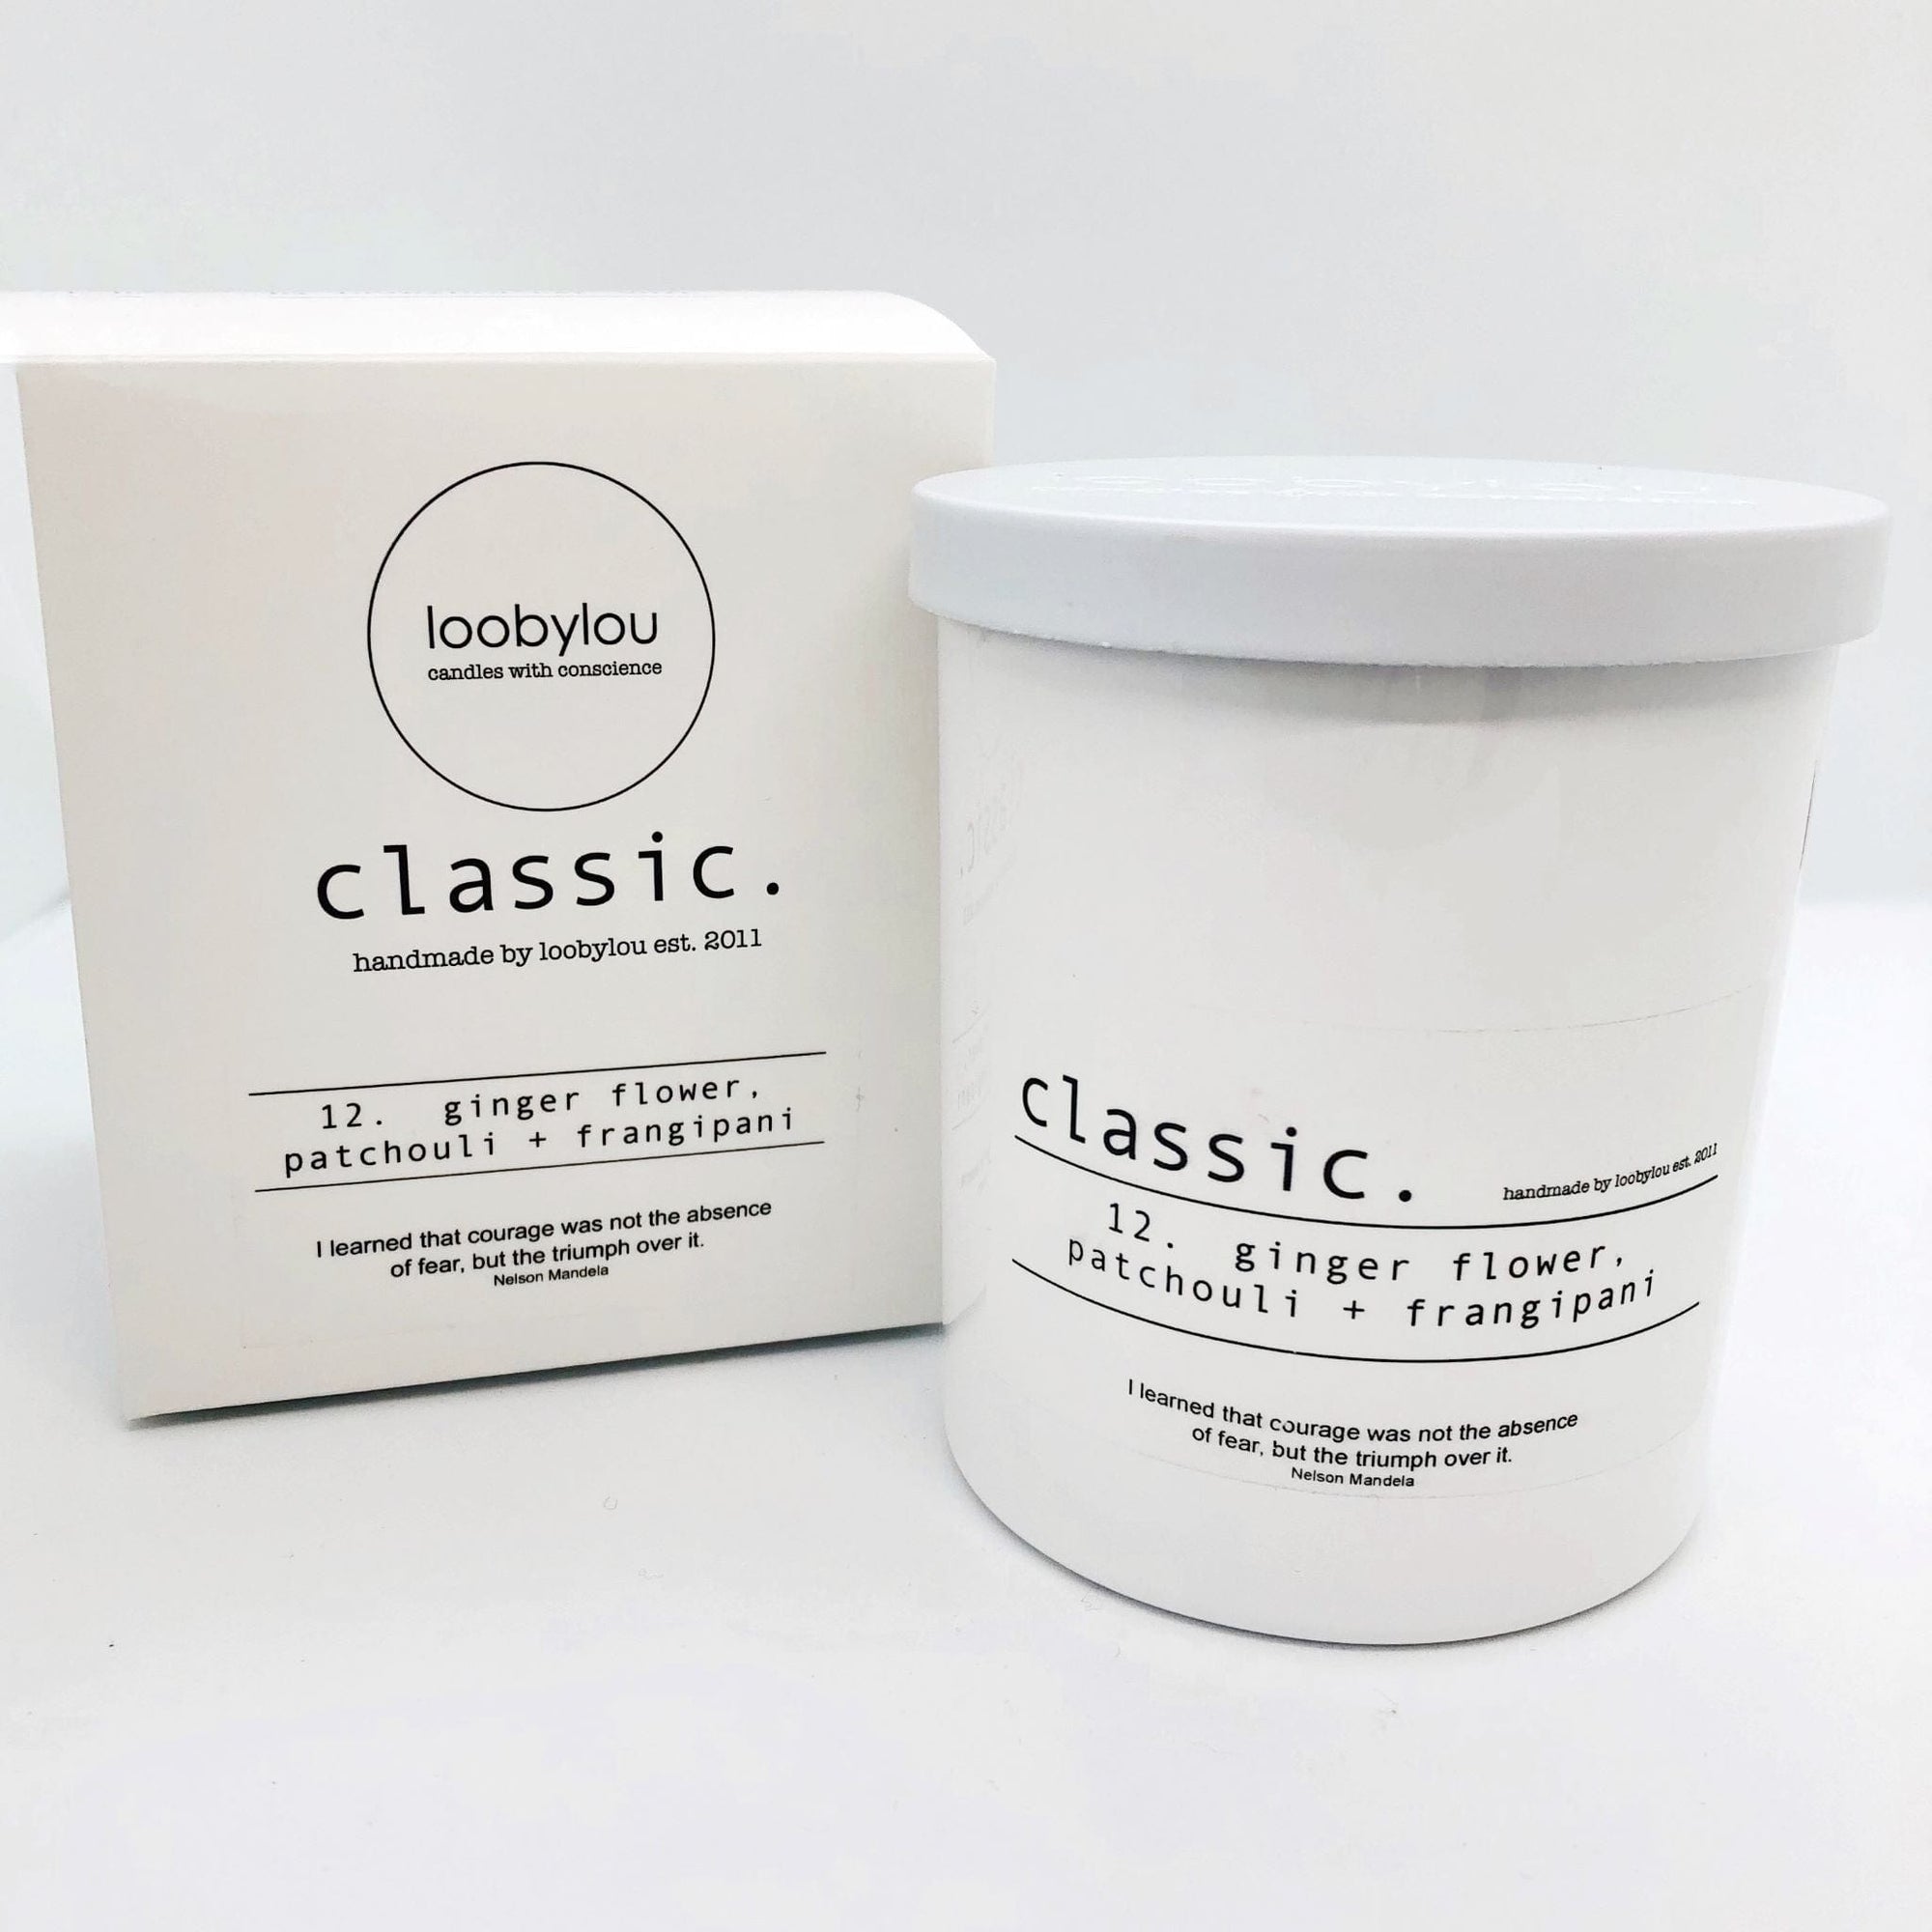 Beautifully Gifted Candles CLASSIC RANGE CANDLES by Loobylou